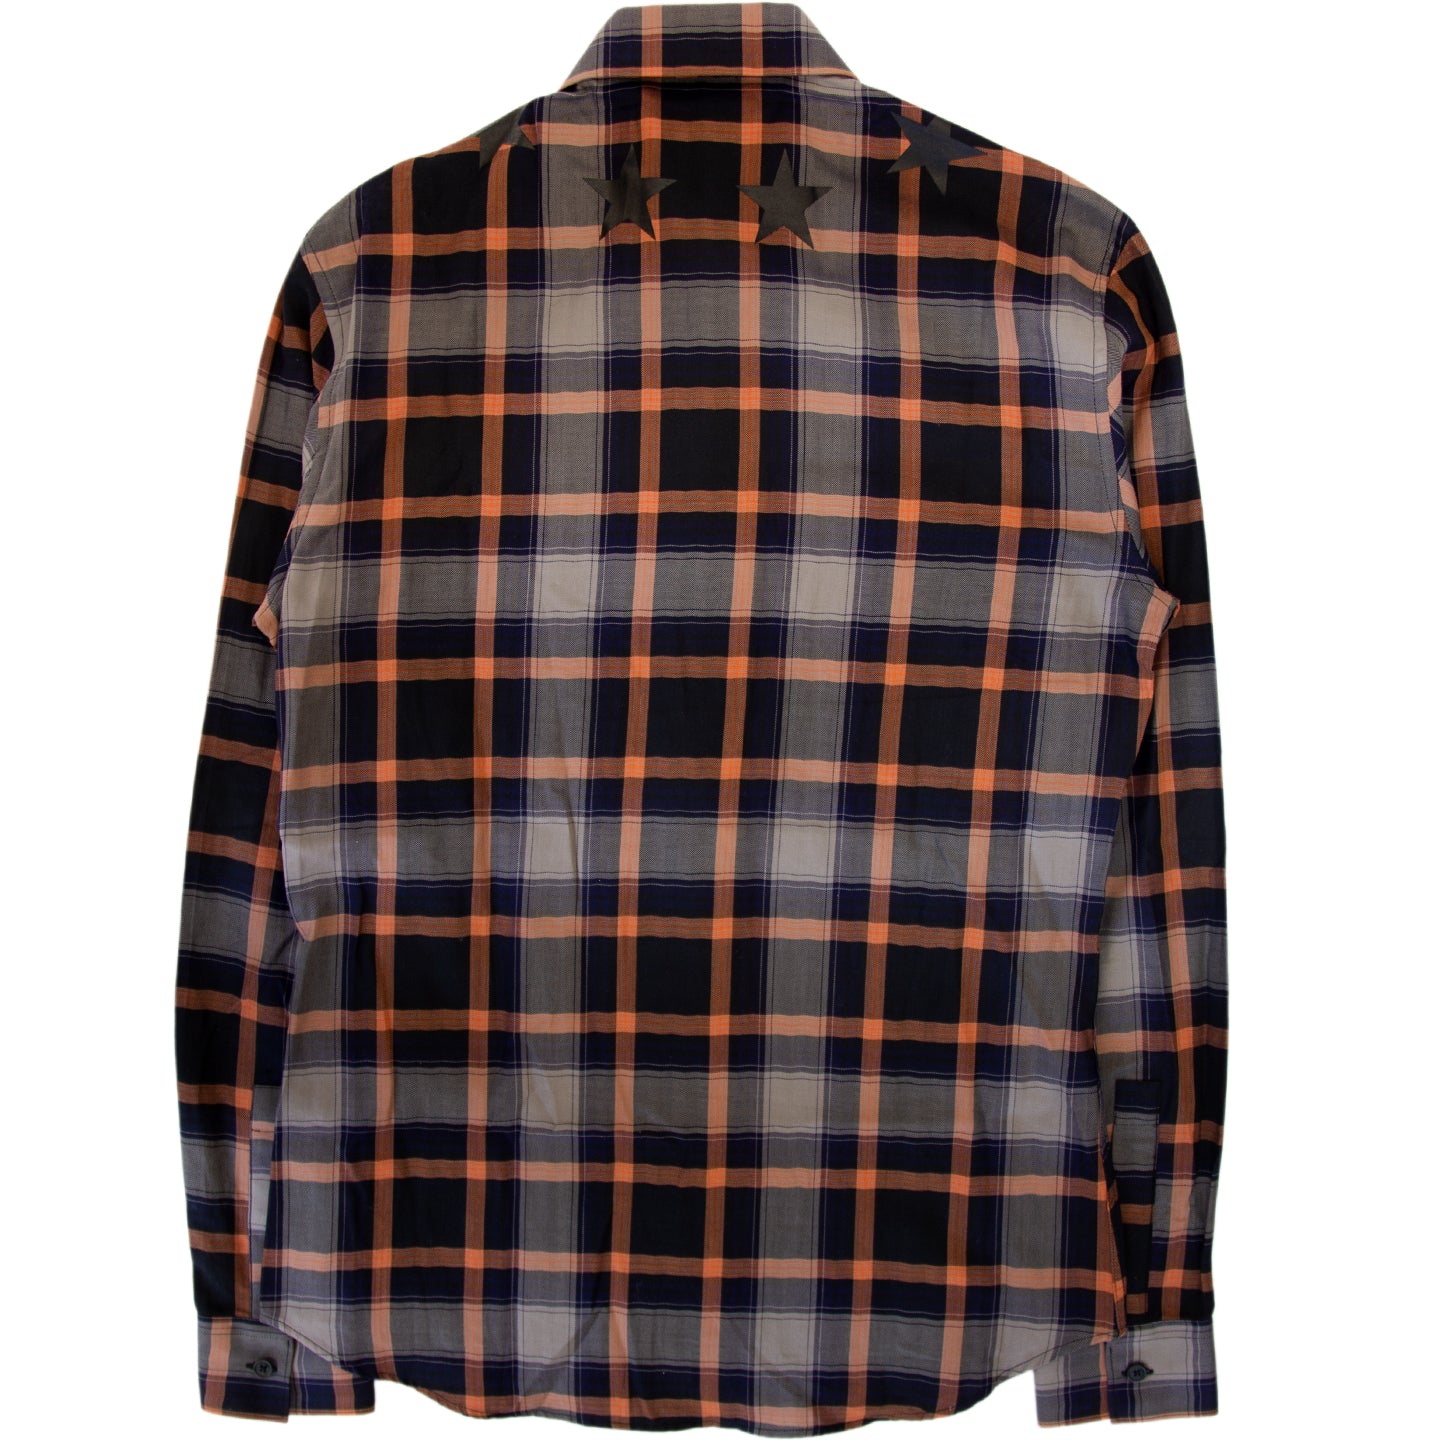 GIVENCHY STAR PLAID BUTTON UP